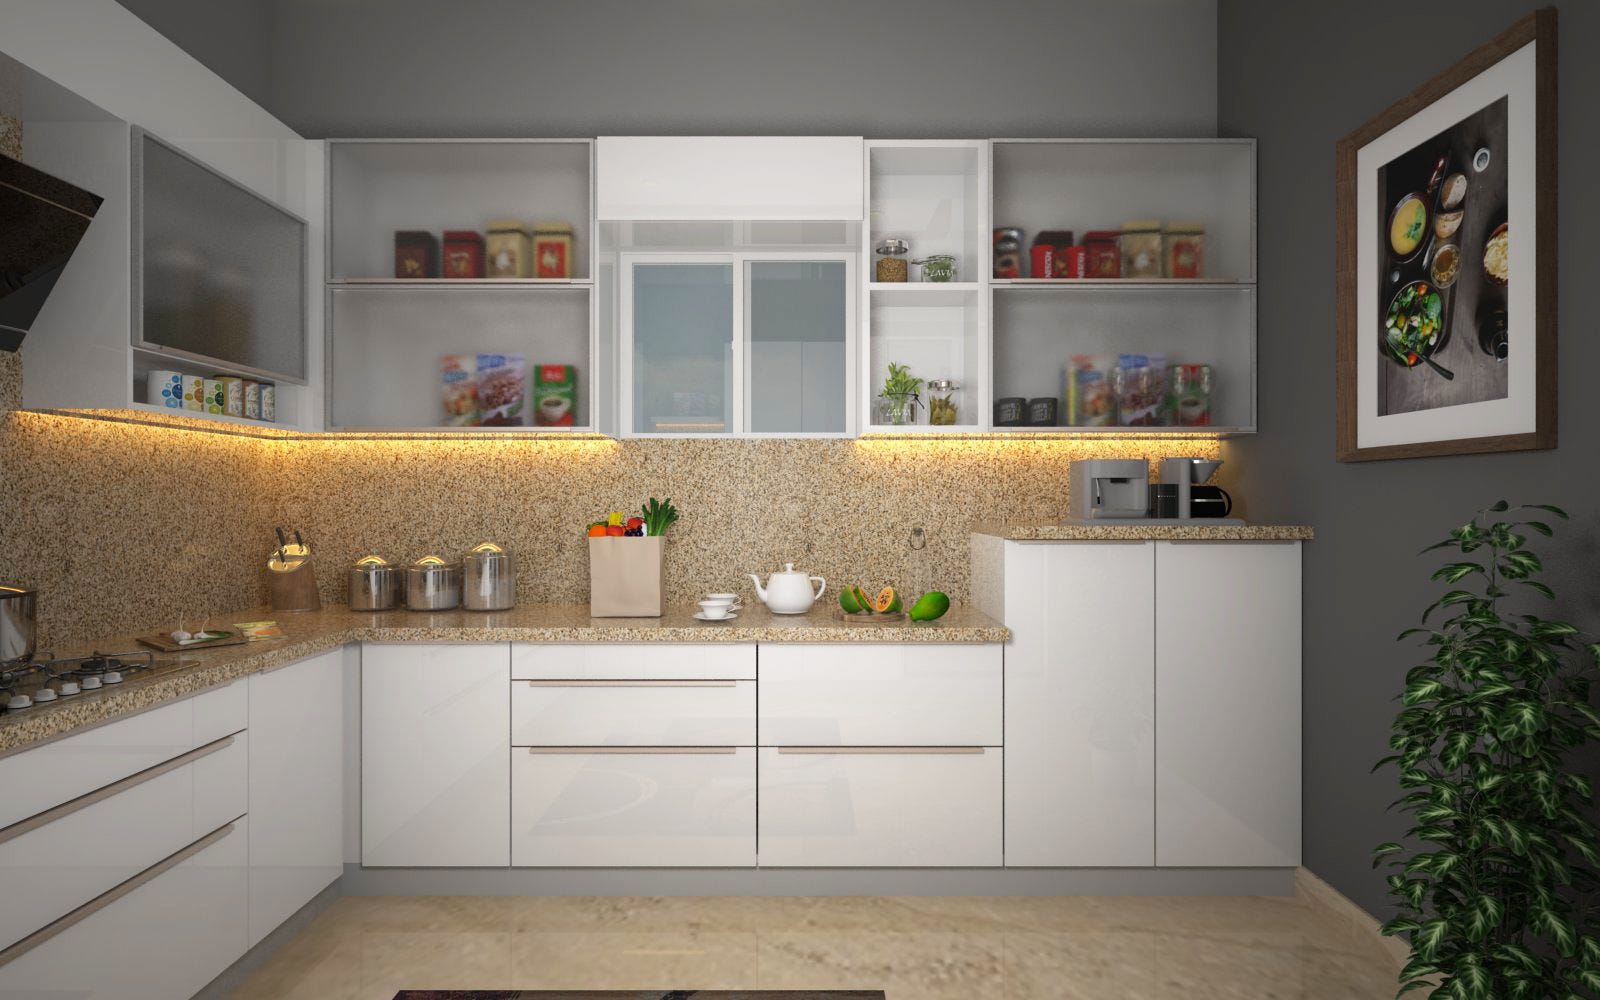 Different Kitchen Finishes Adding Colours With Different Finishes By Modular Kitchen Company Medium